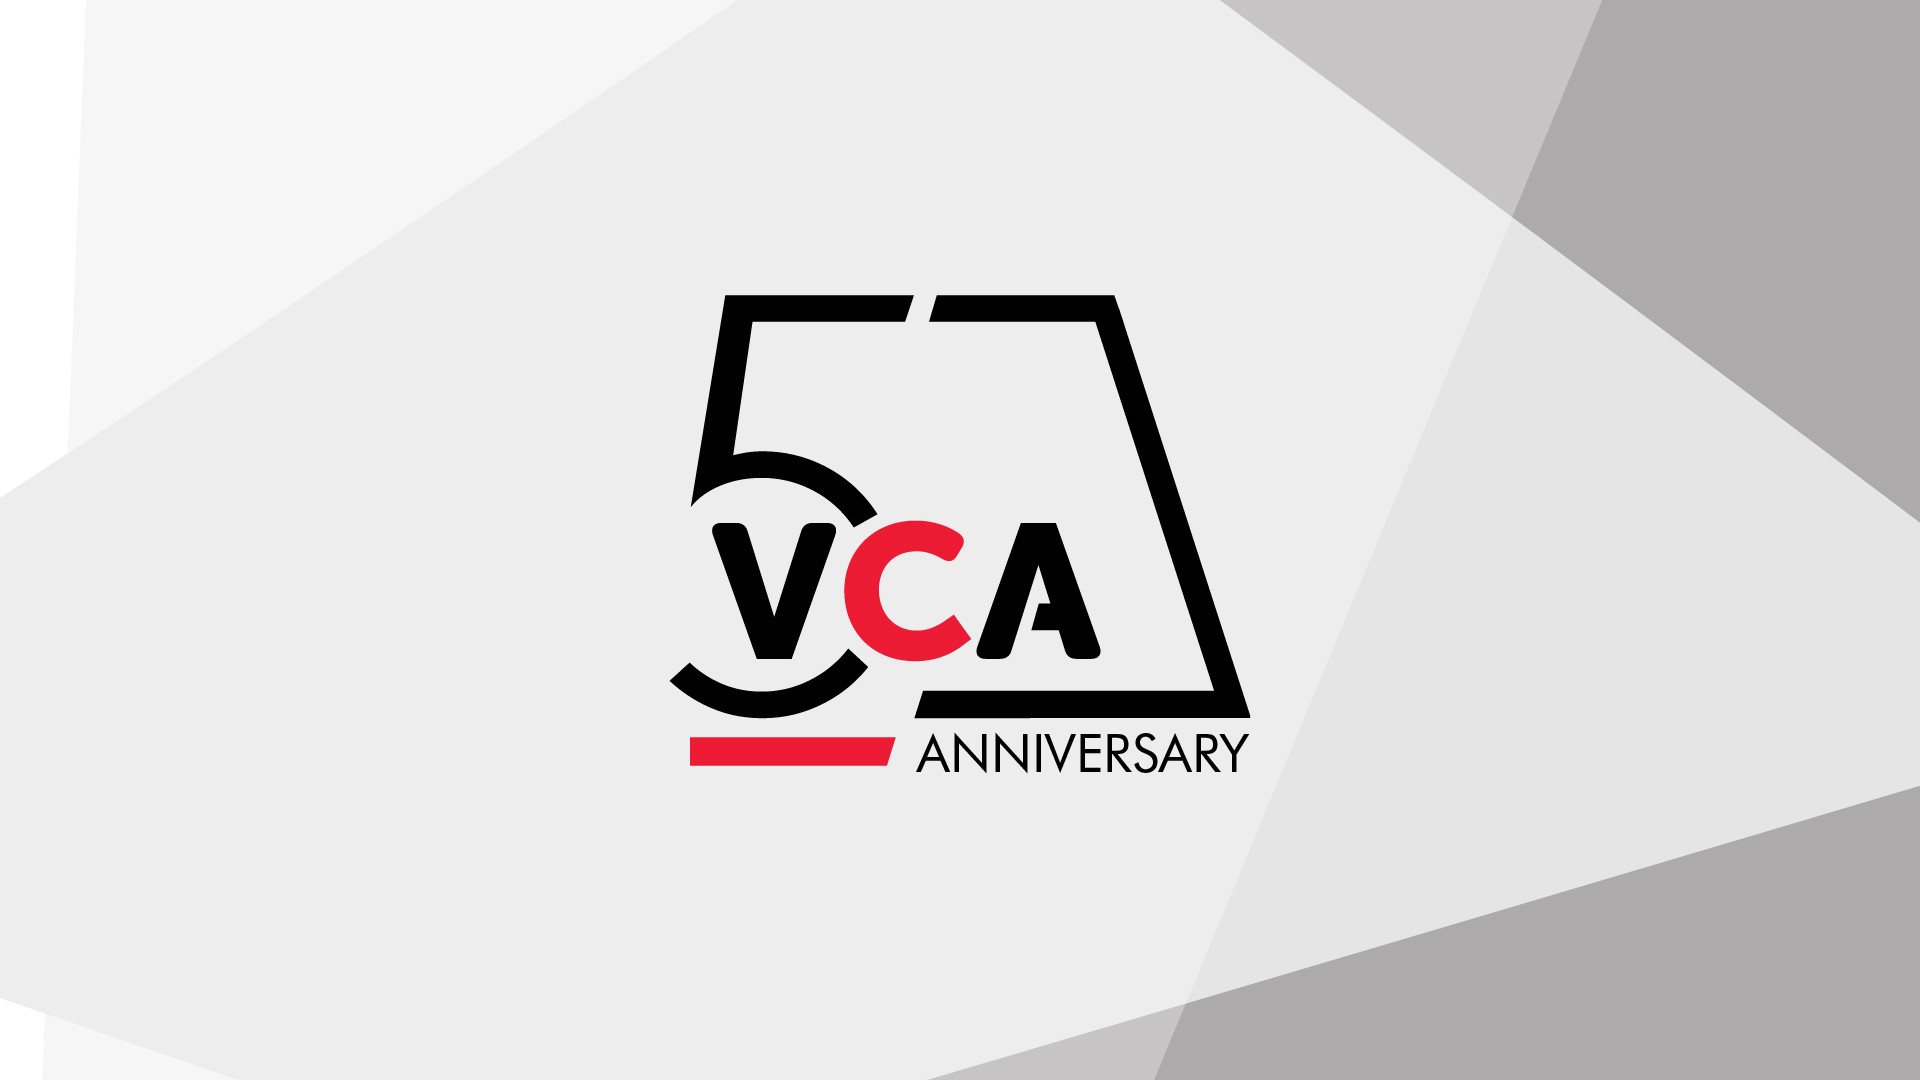 The Valletta Cultural Agency turns five!